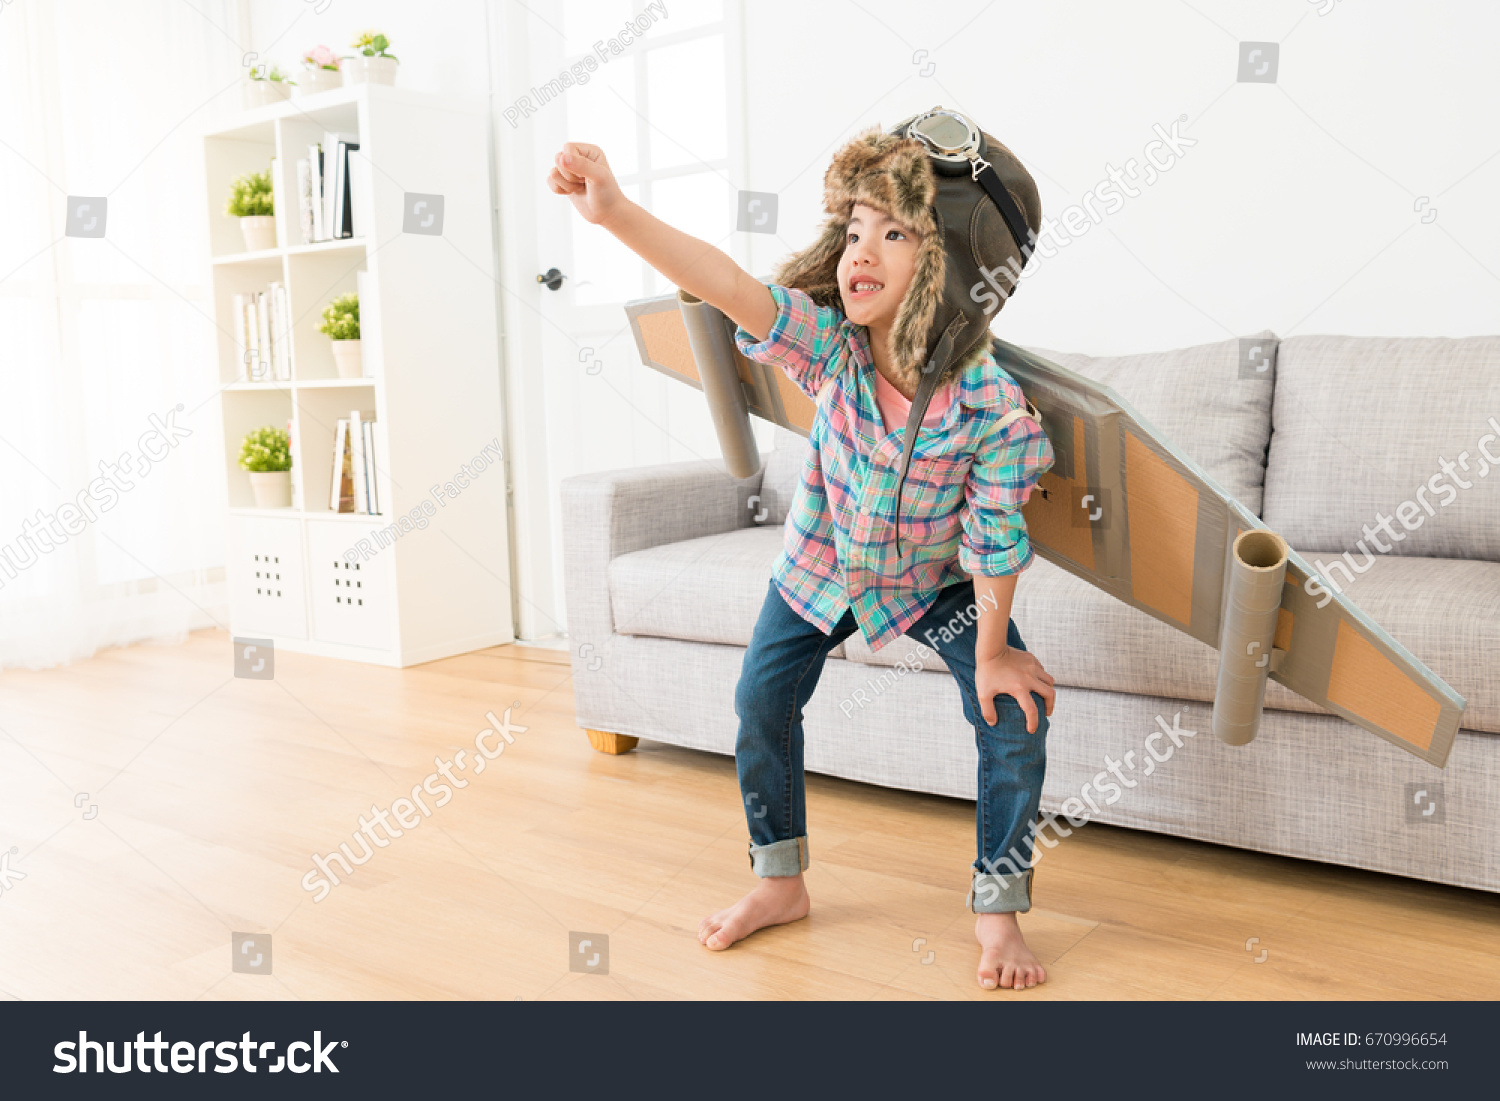 stock-photo-smiling-sweet-female-children-wearing-astronaut-costume-making-ready-to-fly-gesture-standing-on-670996654